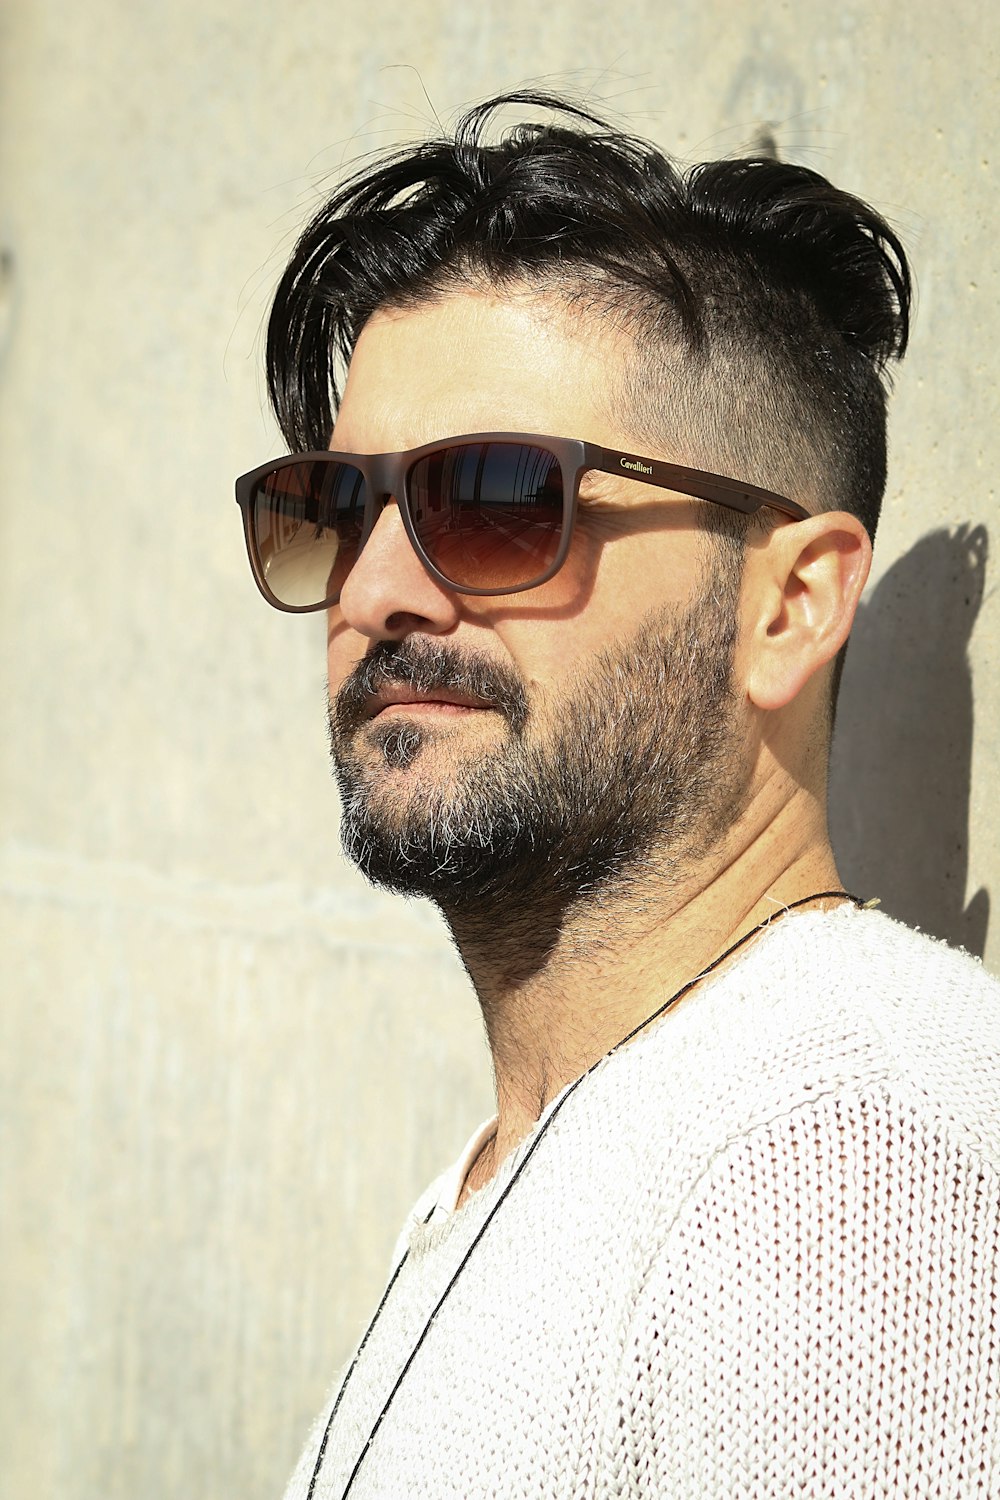 How To Choose The Right Sunglasses For Men?